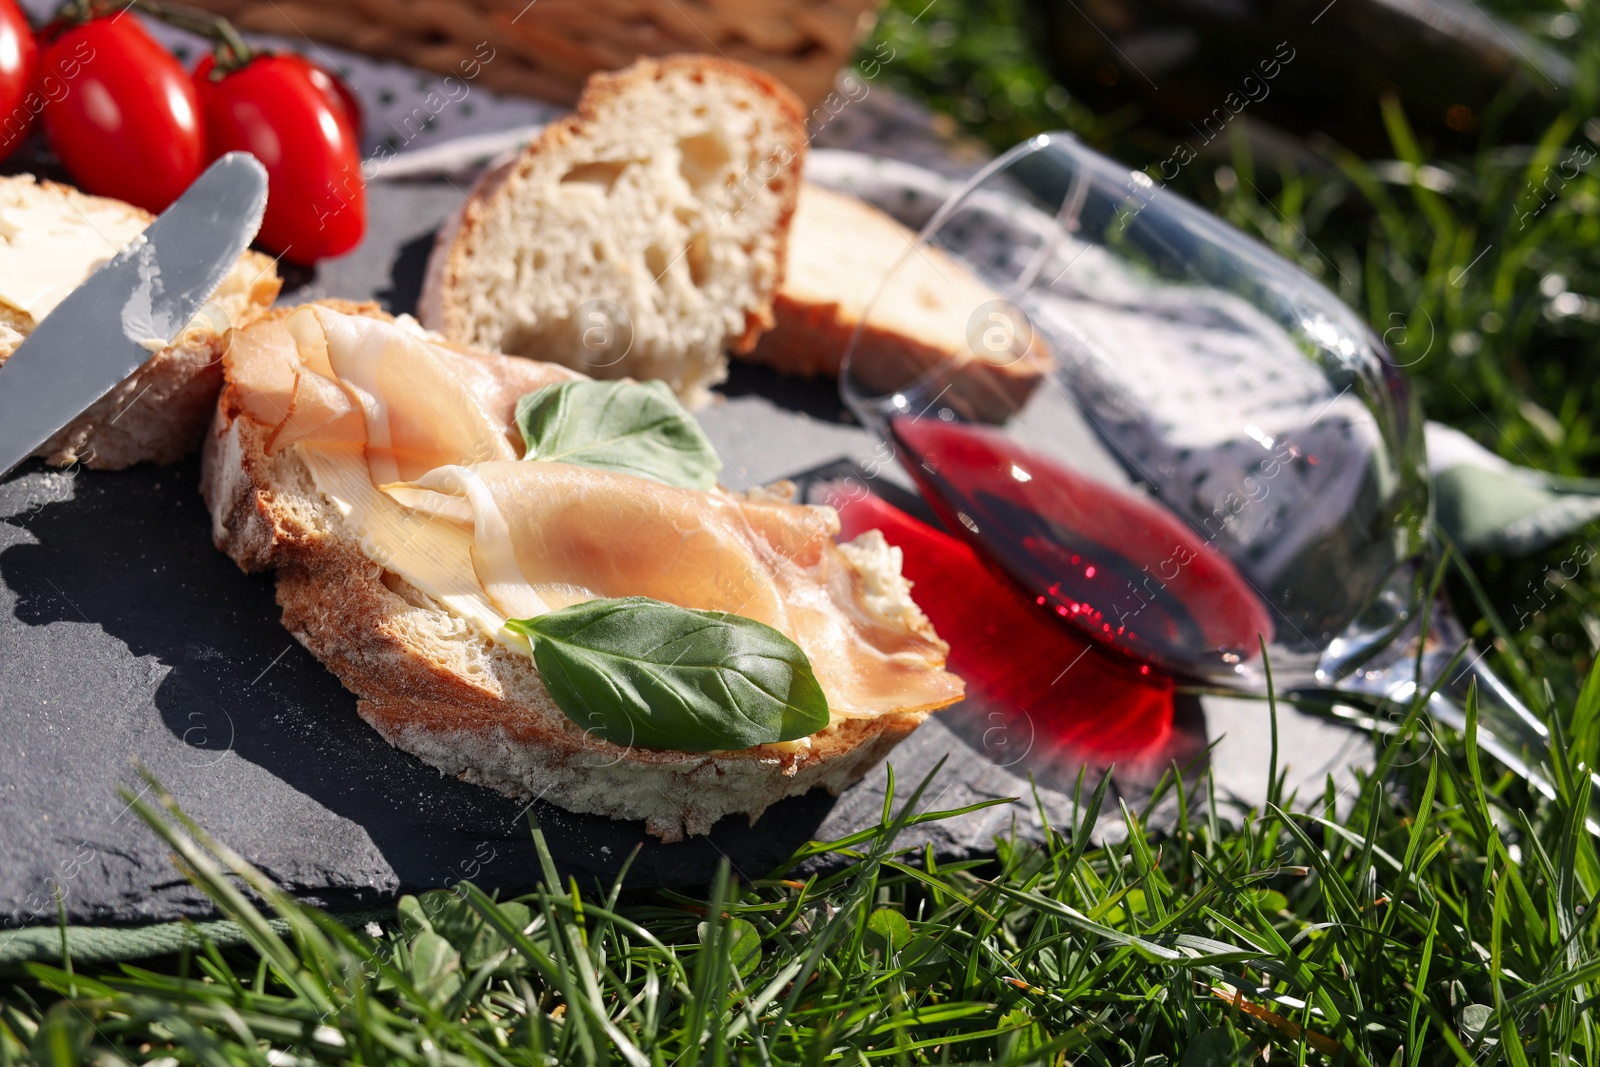 Photo of Blanket with wine and snacks for picnic on green grass, closeup